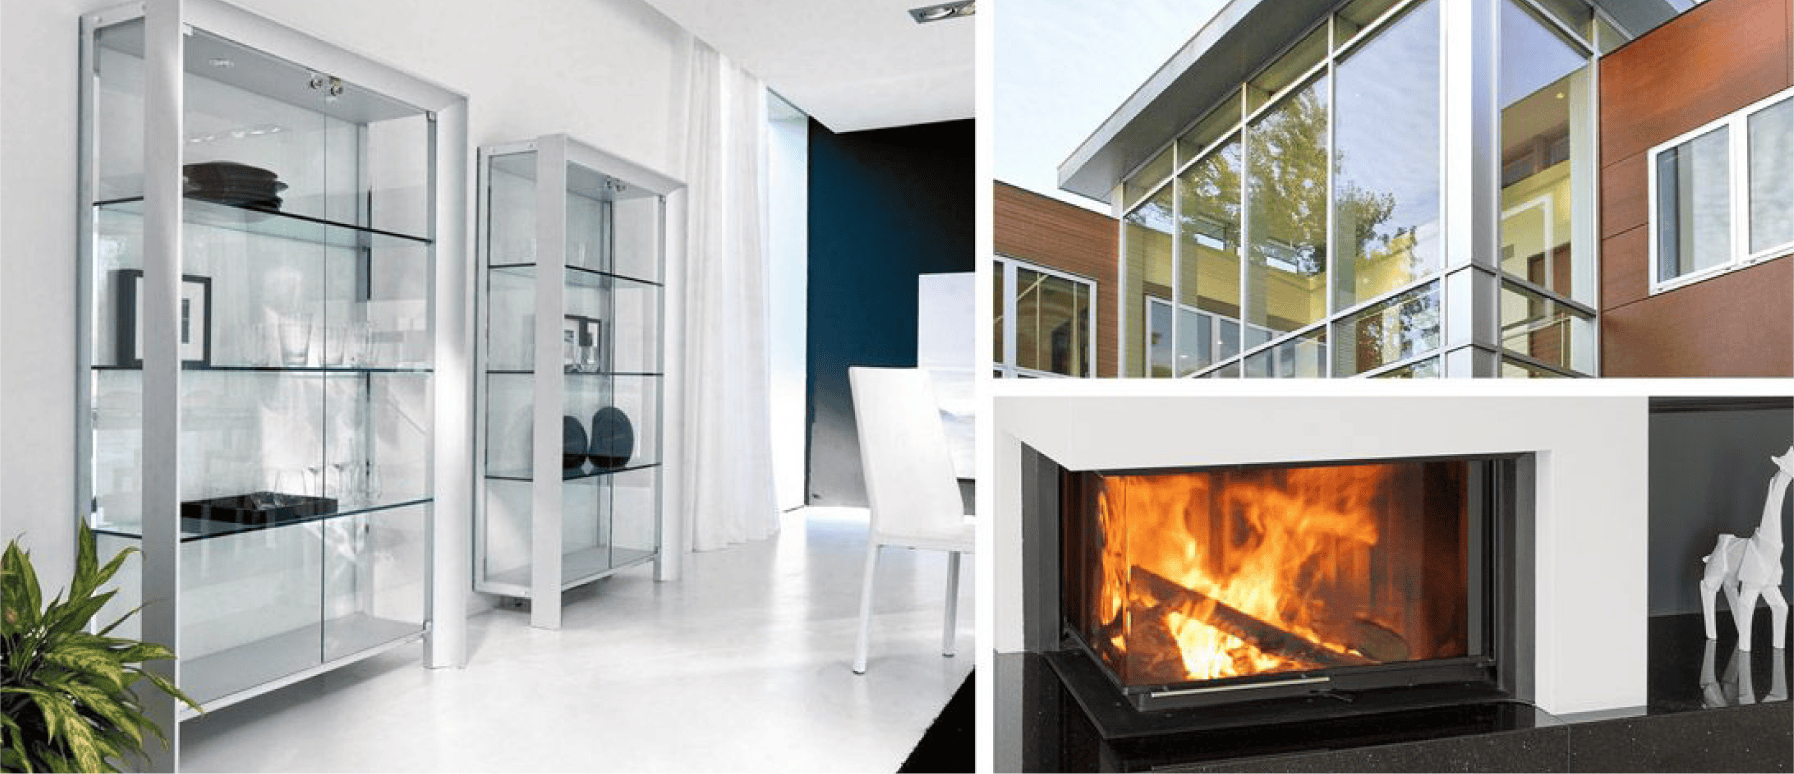 Three pictures feature a house with a fireplace and glass shelves, showcasing different choices for fireplace and window glass, as well as glass shelves.